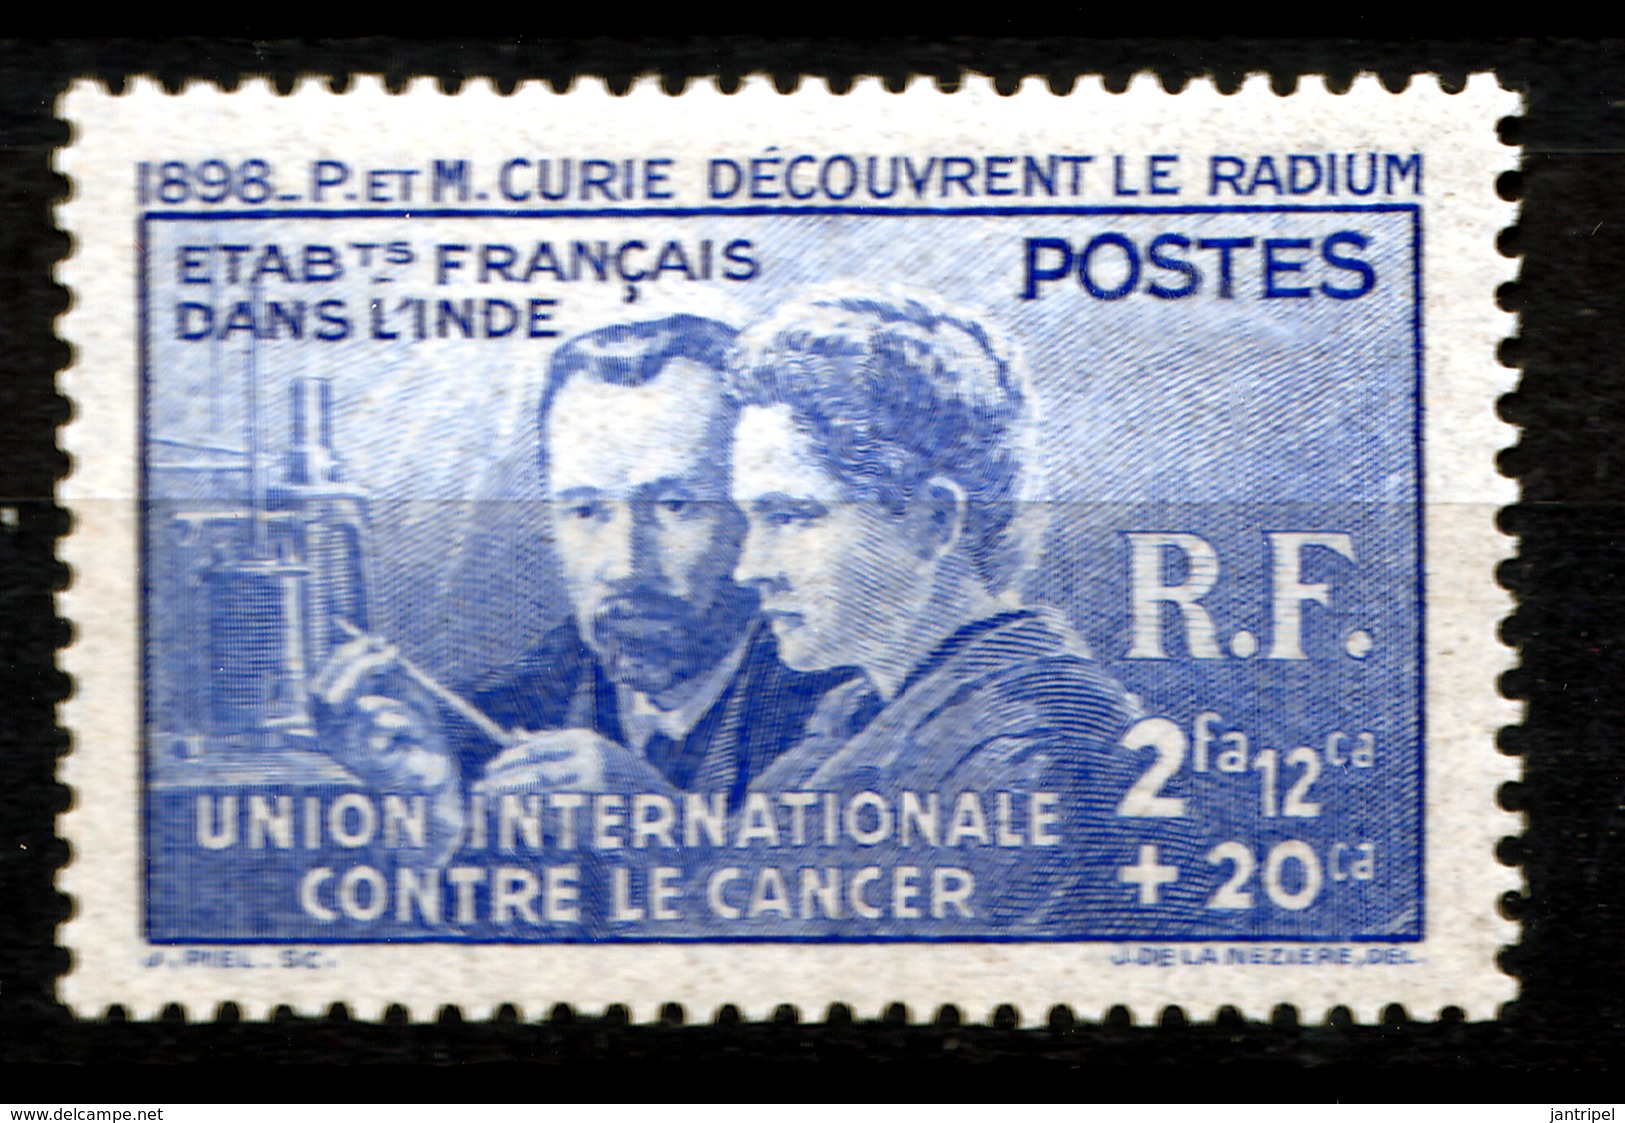 INDE FRANCE  1938  P&M CURIE   MH     CANCER - Unused Stamps